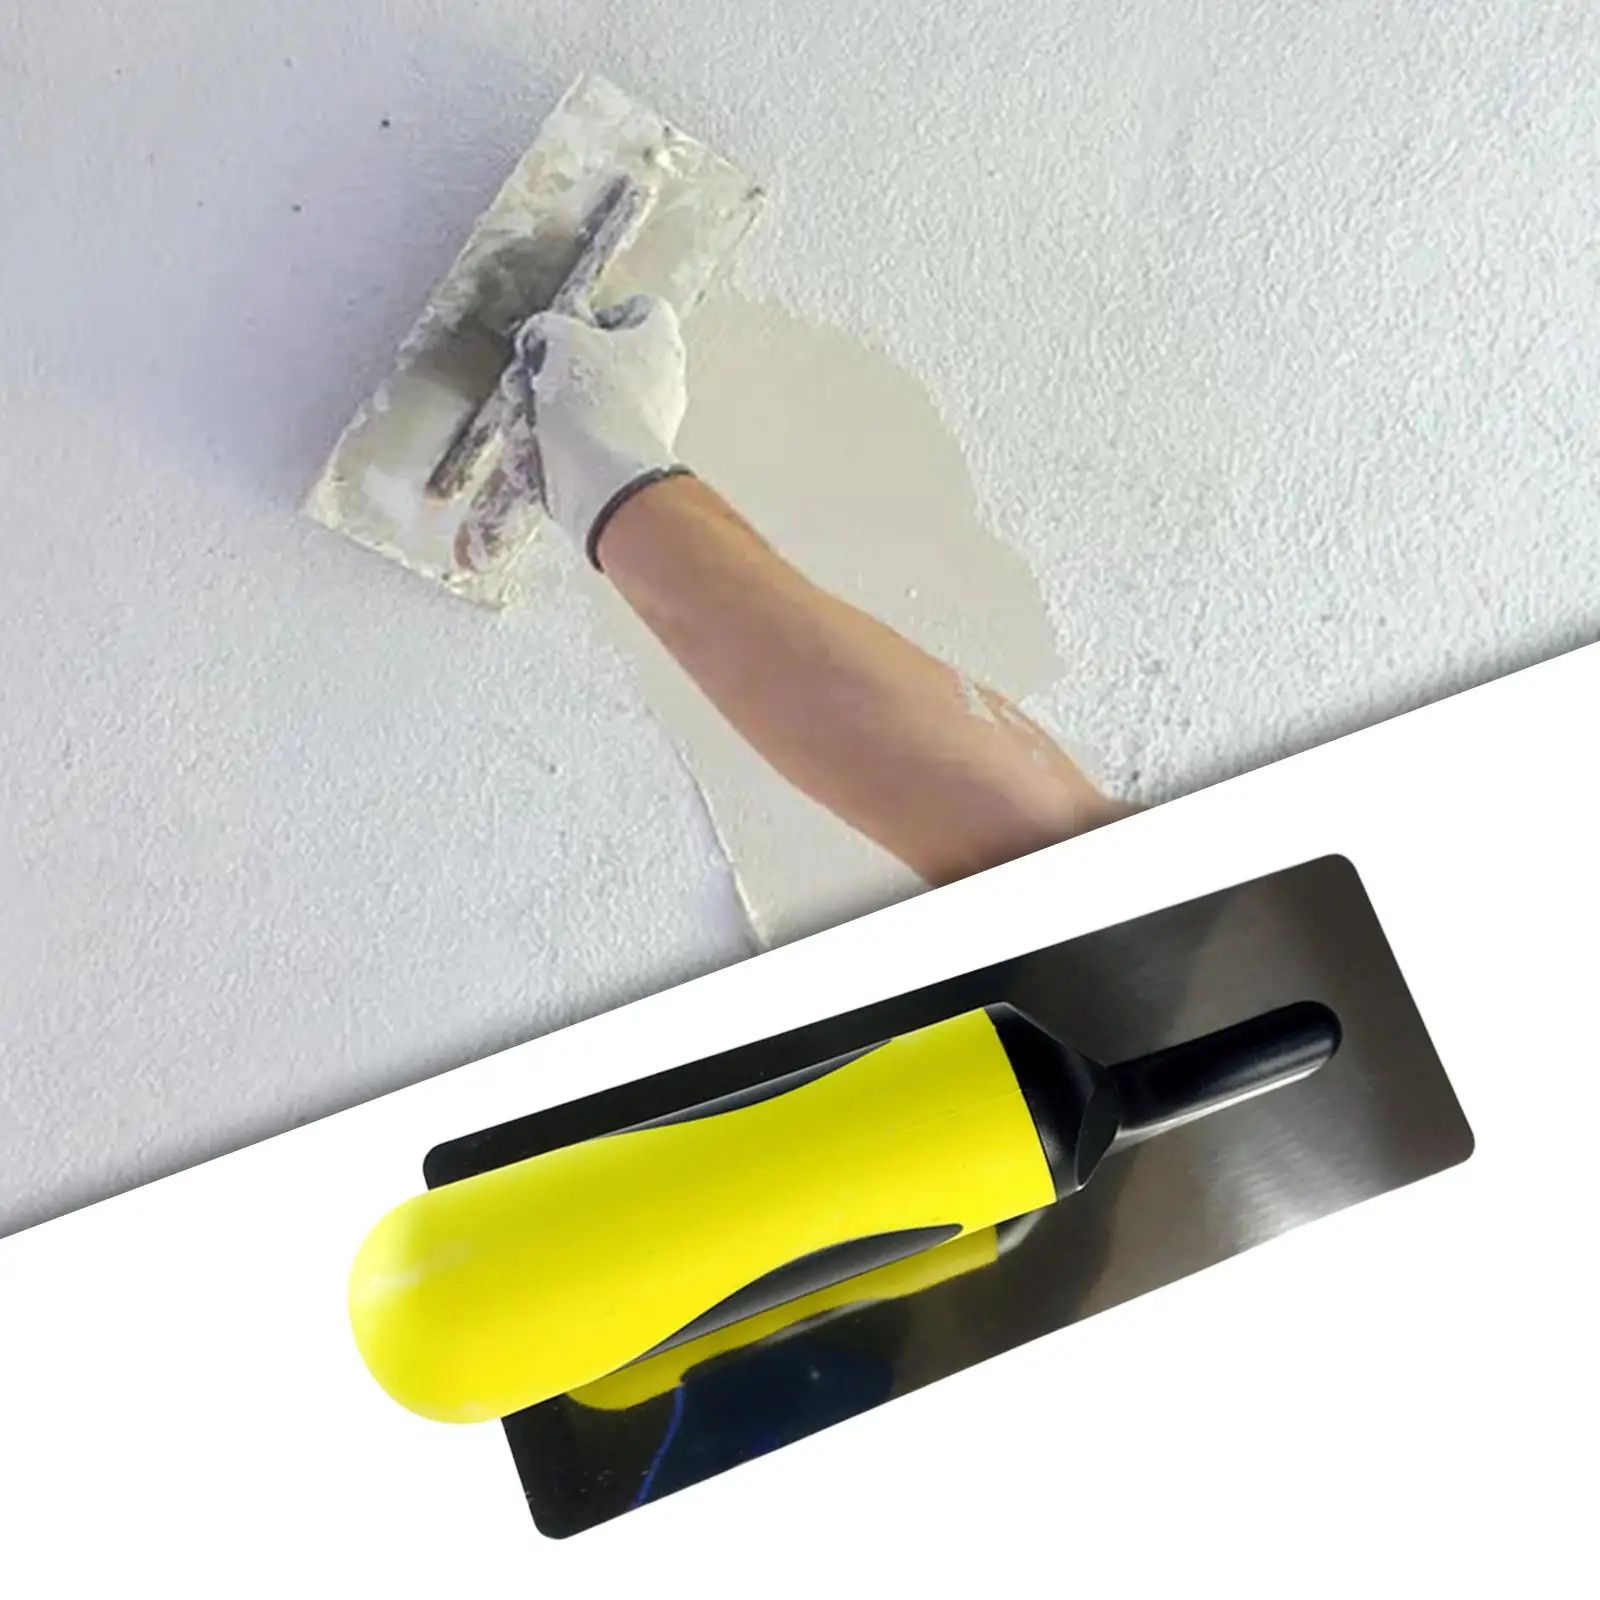 Finisher Plastering Trowel Thick Sturdy Stainless Steel for Cement Drywall Filling Plastering Removing Wallpaper Wall Decoration